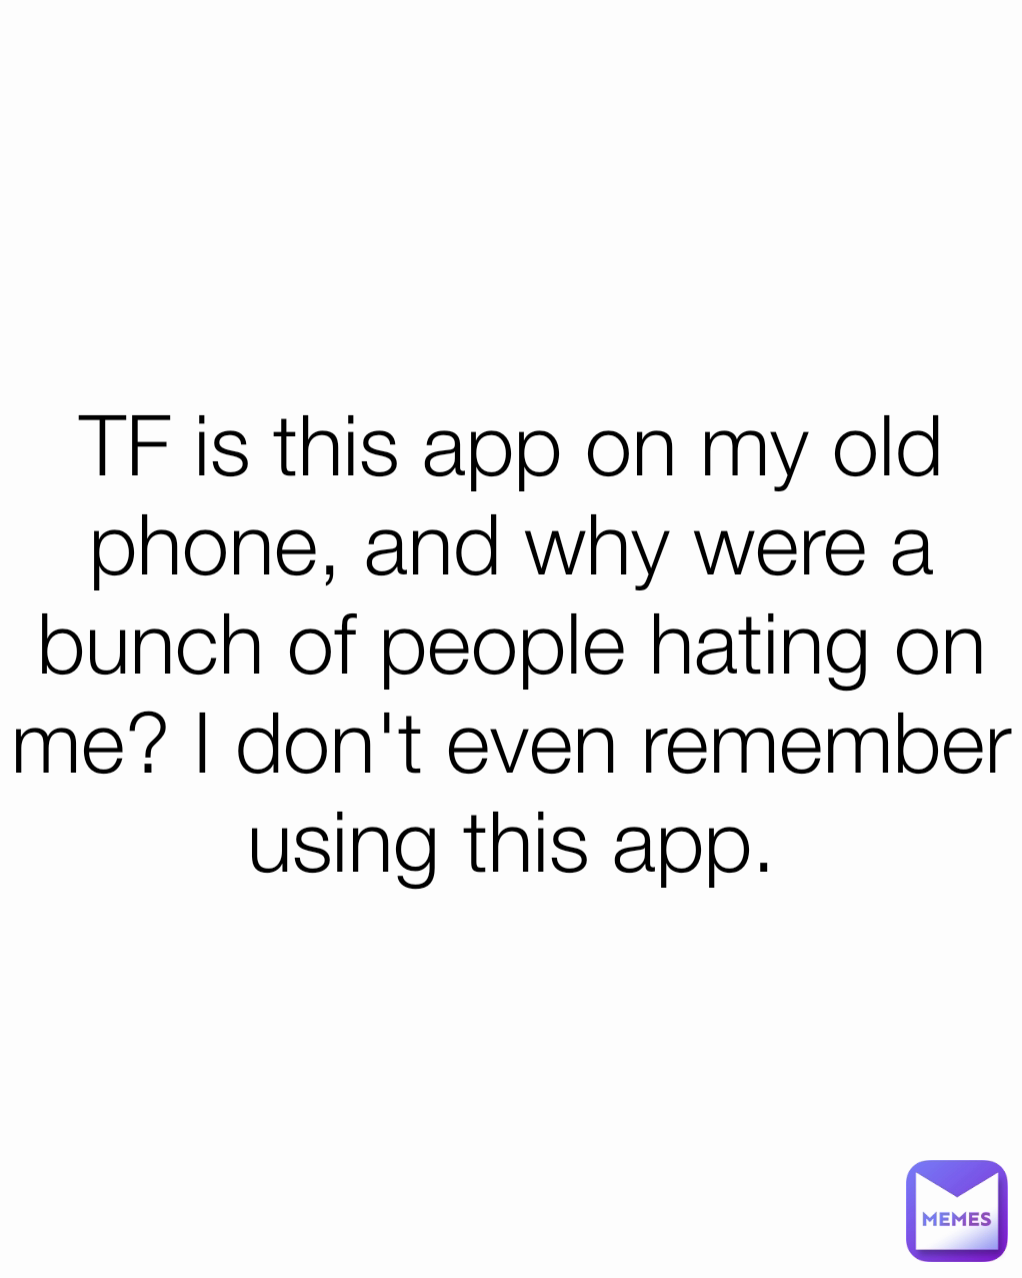 TF is this app on my old phone, and why were a bunch of people hating on me? I don't even remember using this app.